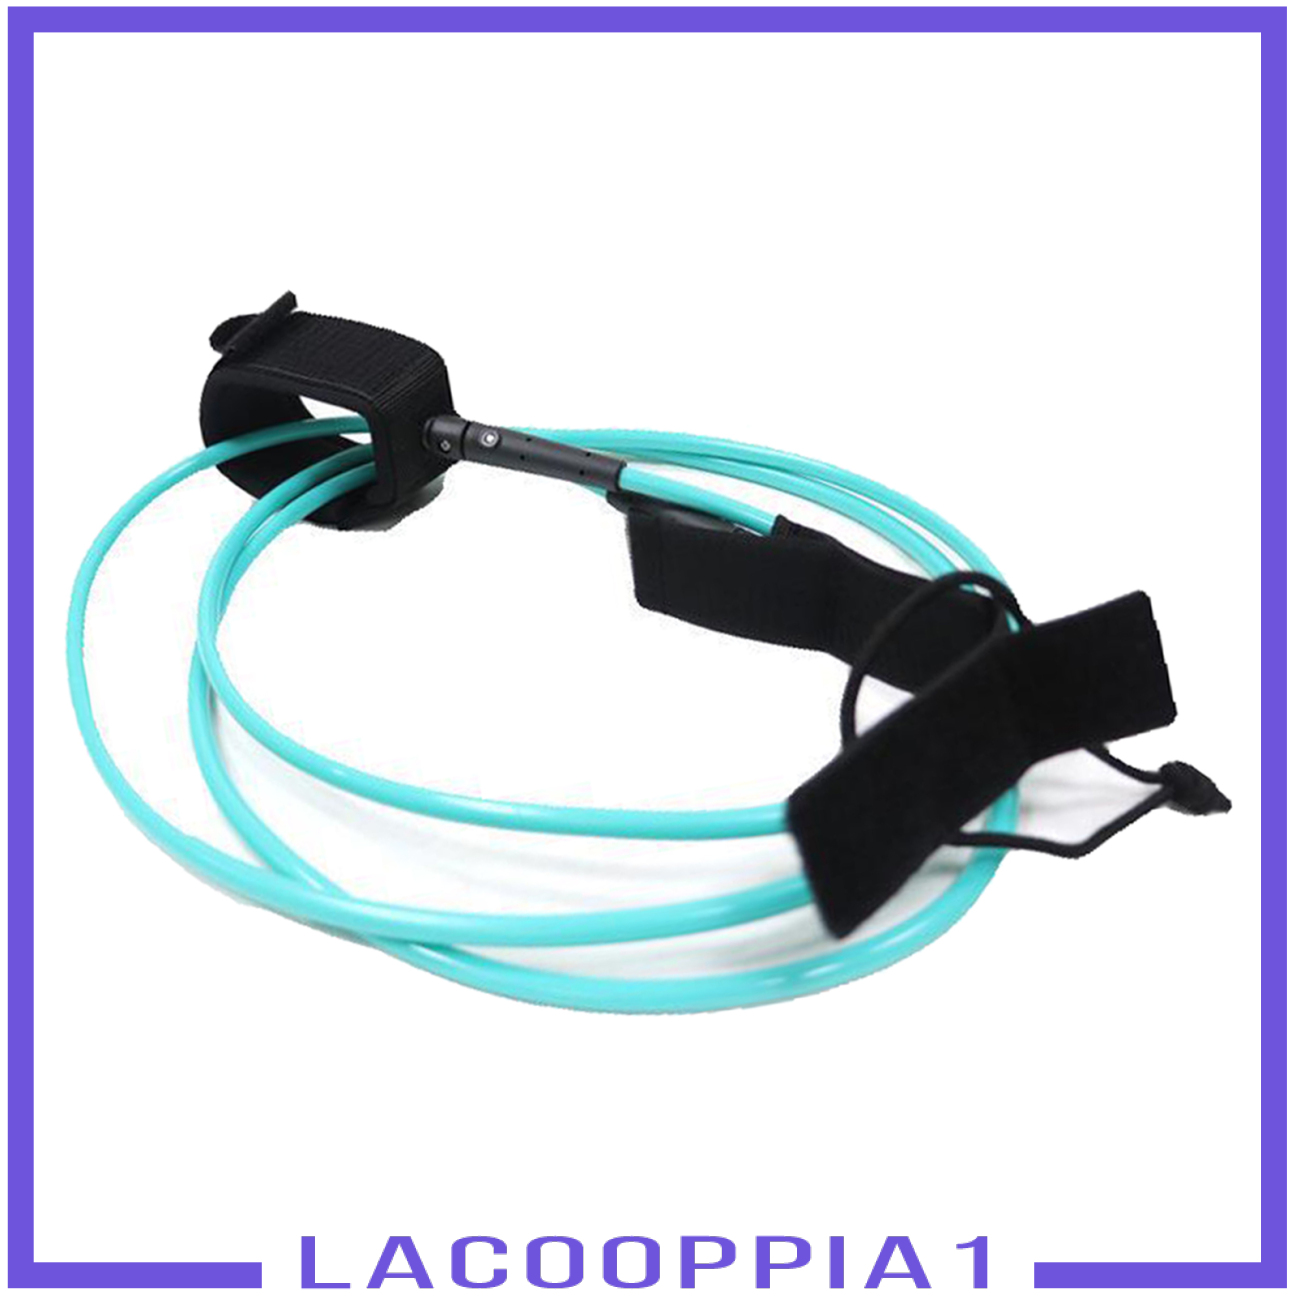 [LACOOPPIA1]10 Feet Surfing Ankle Leash Stand Up Board Leg Rope Leg Wrists Tether Cord